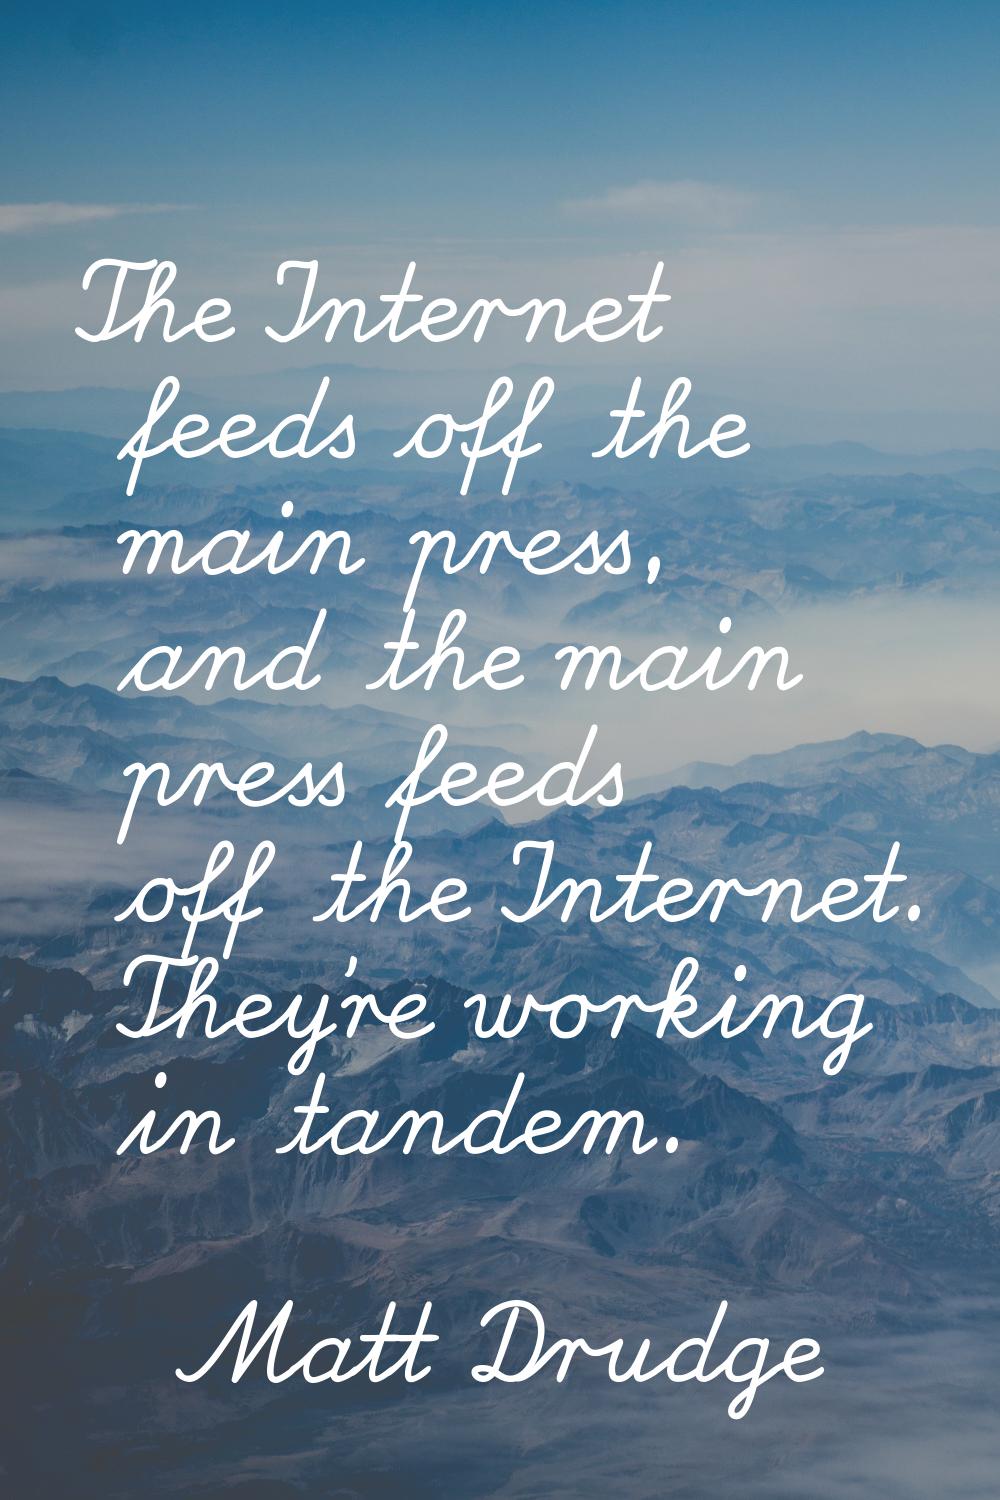 The Internet feeds off the main press, and the main press feeds off the Internet. They're working i